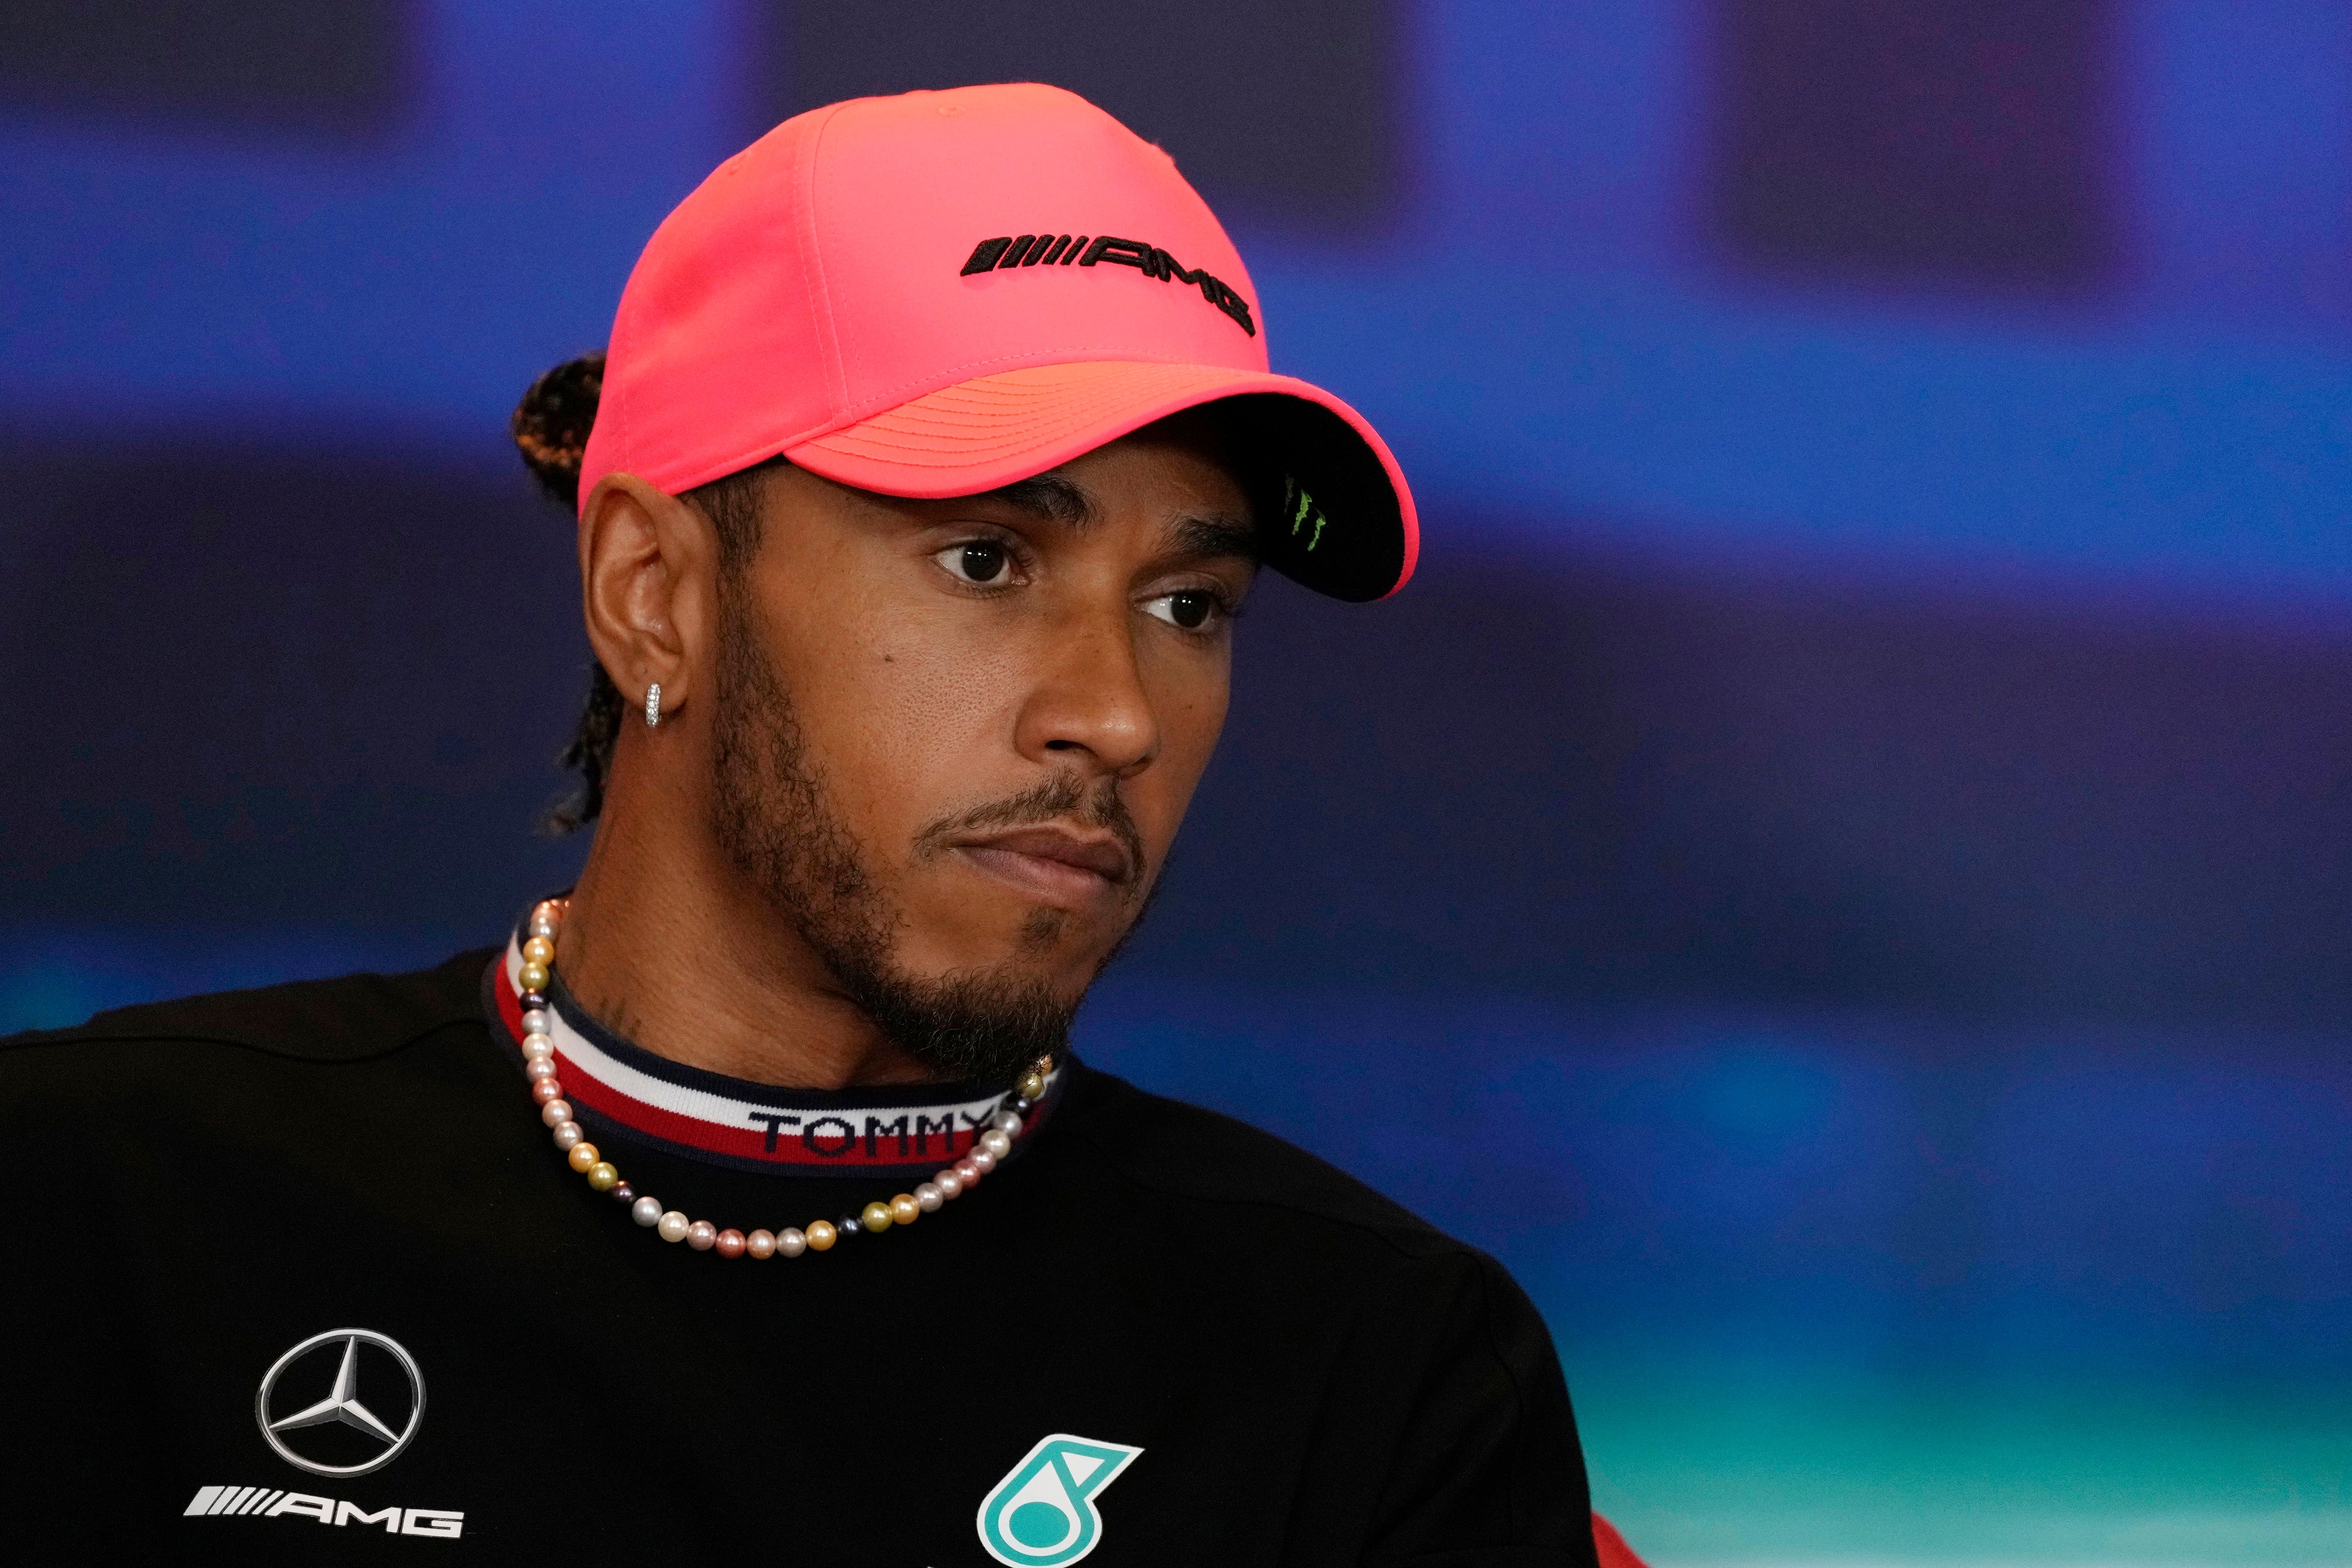 The likes of Lewis Hamilton (pictured) have regularly spoken out on matters such as racial inequality, minority rights and climate change